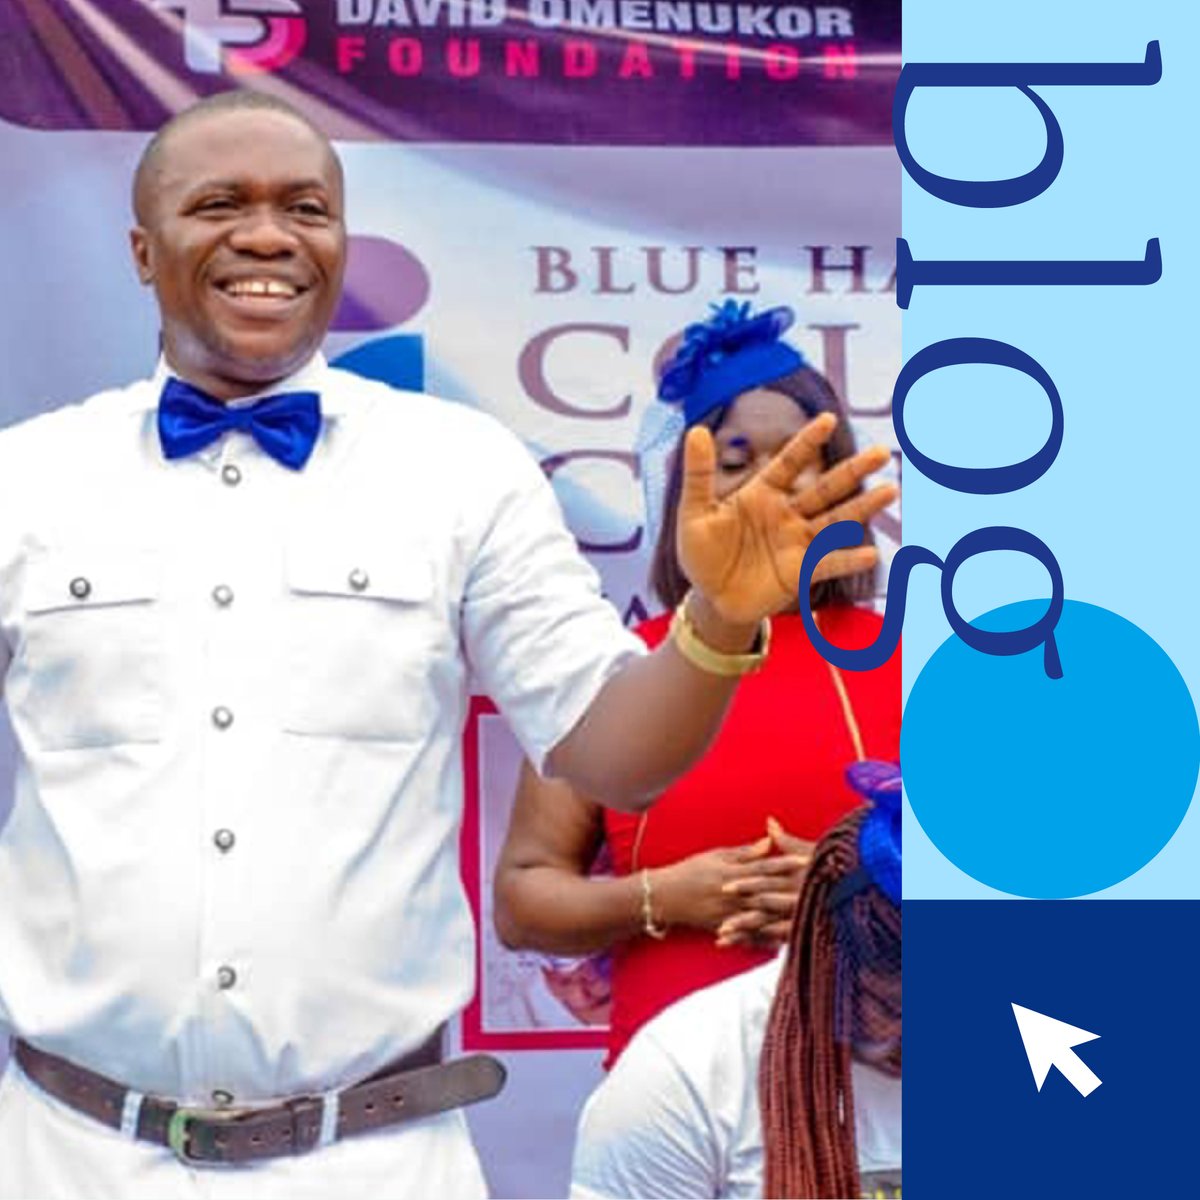 New on the blog, see highlights from Blue Hat Bow Tie Weekend in Africa. gcca.info/Blog_Post_5_7_… #bluehatbowtie #colorectalcancer #crcawareness